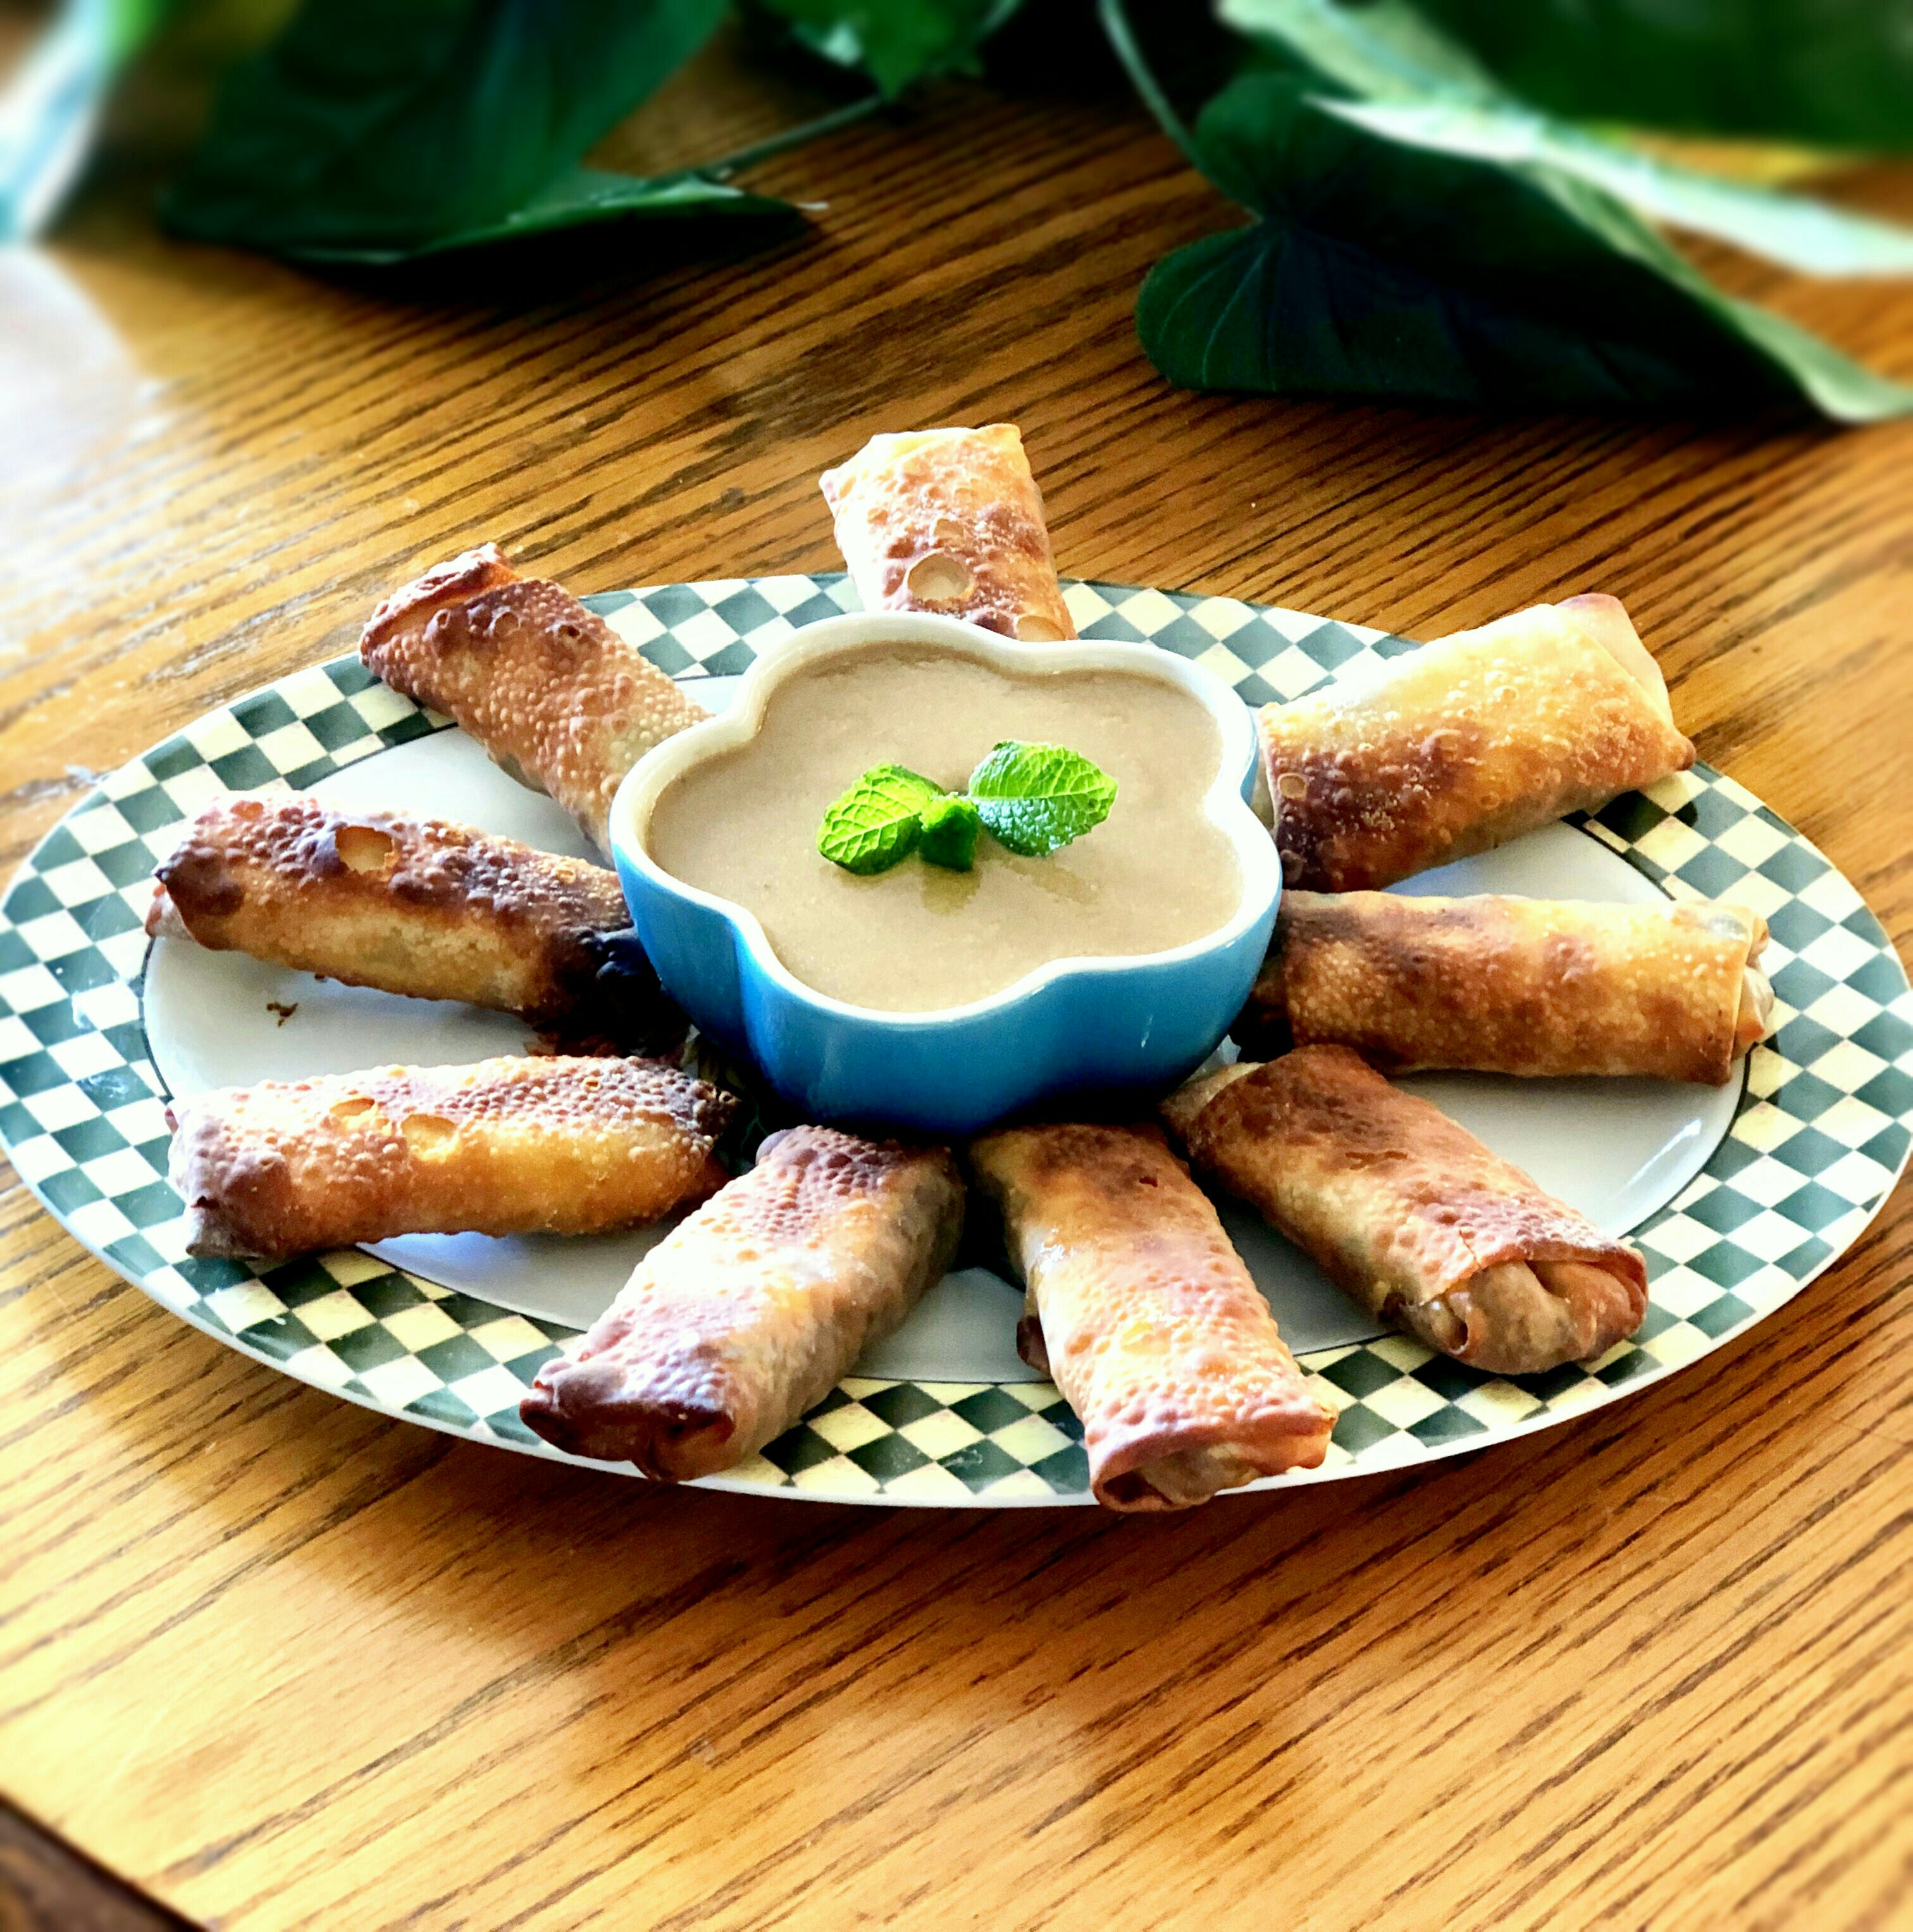 "Air-fried lumpia? Your taste buds will never know the difference, but your waistline will!" says recipe creator Yoly. "The same crispiness and tastiness is in this lumpia recipe without having to deep fry." You can use this method to air-fry other lumpia recipes, too.
                          